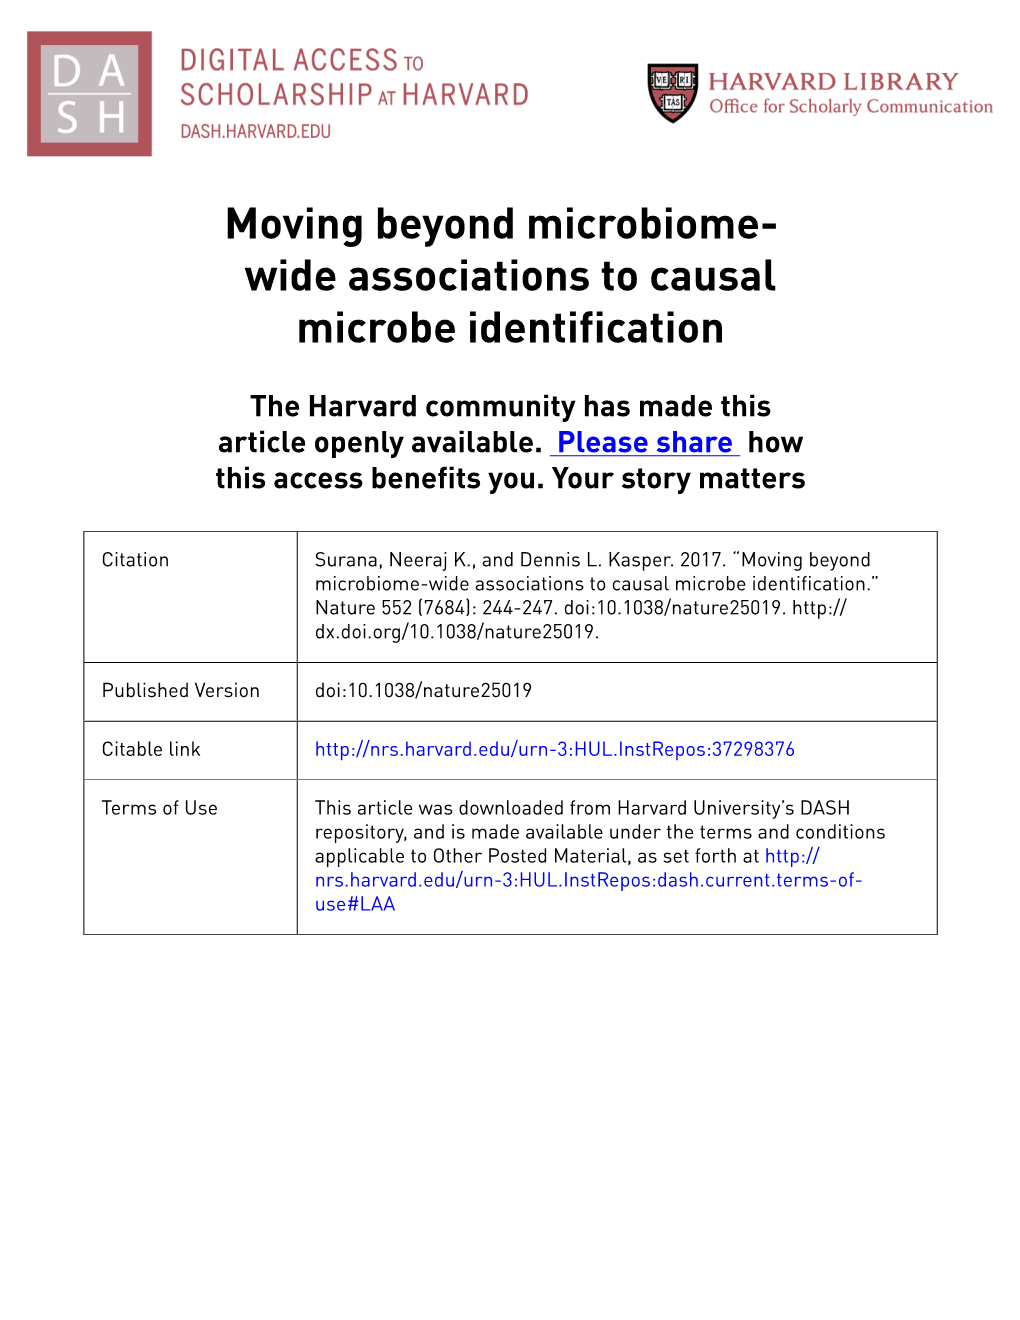 Moving Beyond Microbiome-Wide Associations to Causal Microbe Identification.” Nature 552 (7684): 244-247